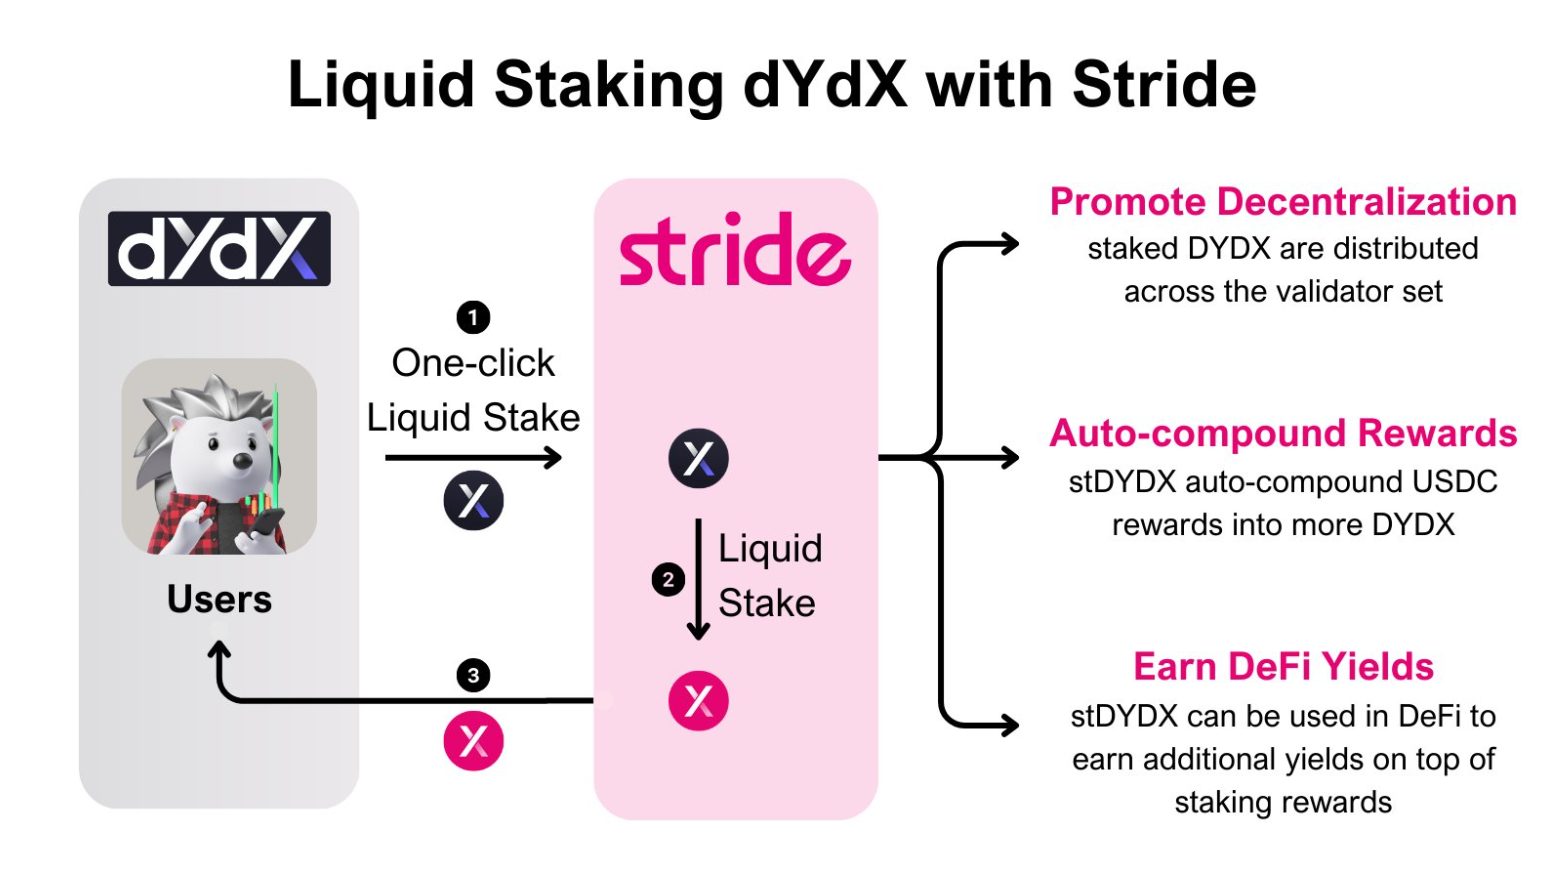 dYdX community approves 60 million token stake with Stride